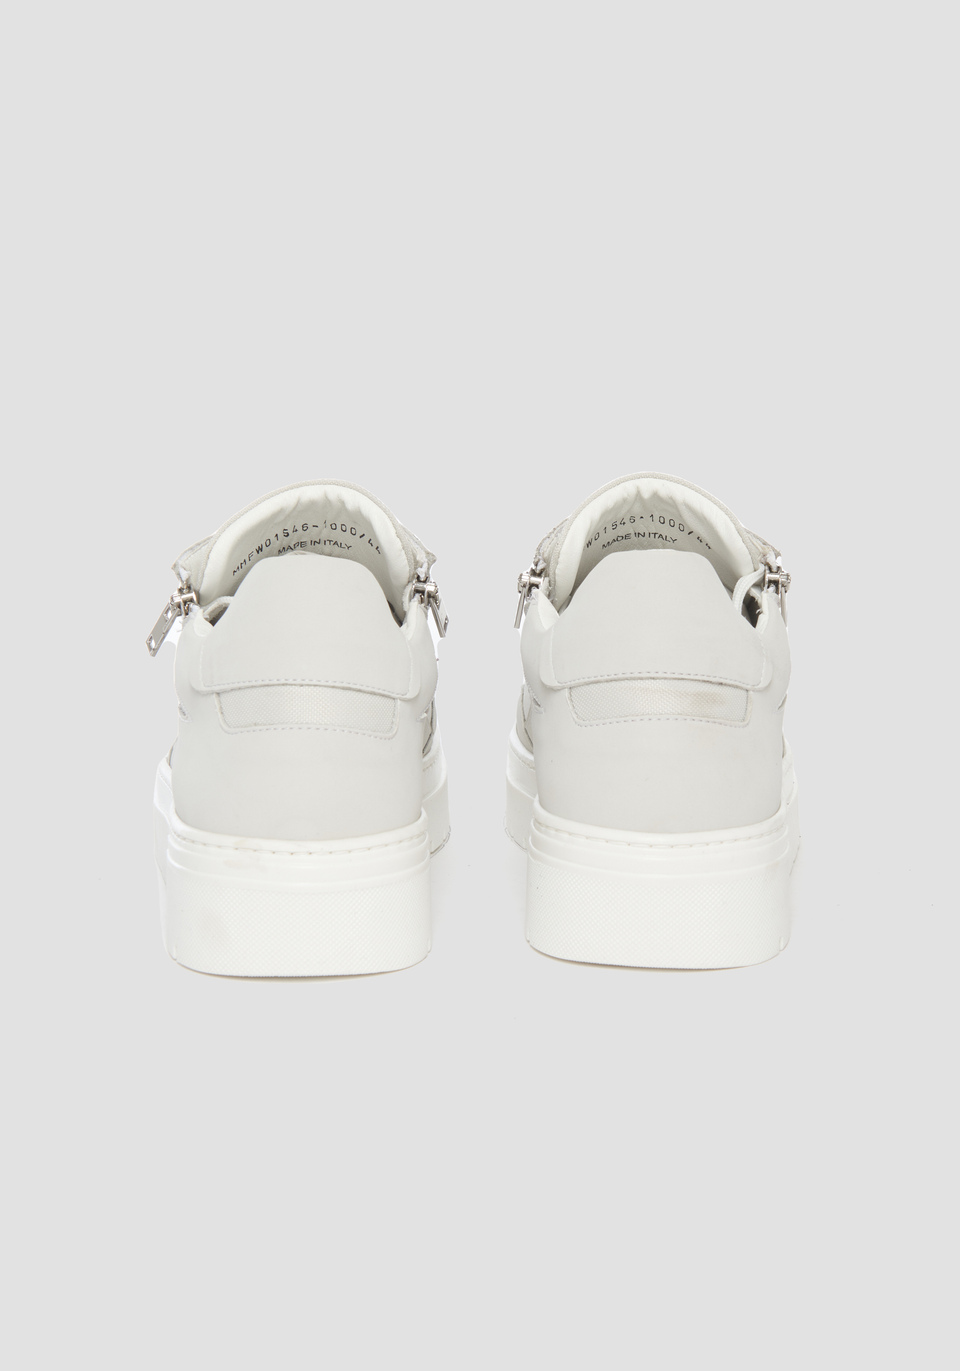 "ZIPPER GOSH" SNEAKERS IN FABRIC AND RECYCLED NUBUCK - Antony Morato Online Shop